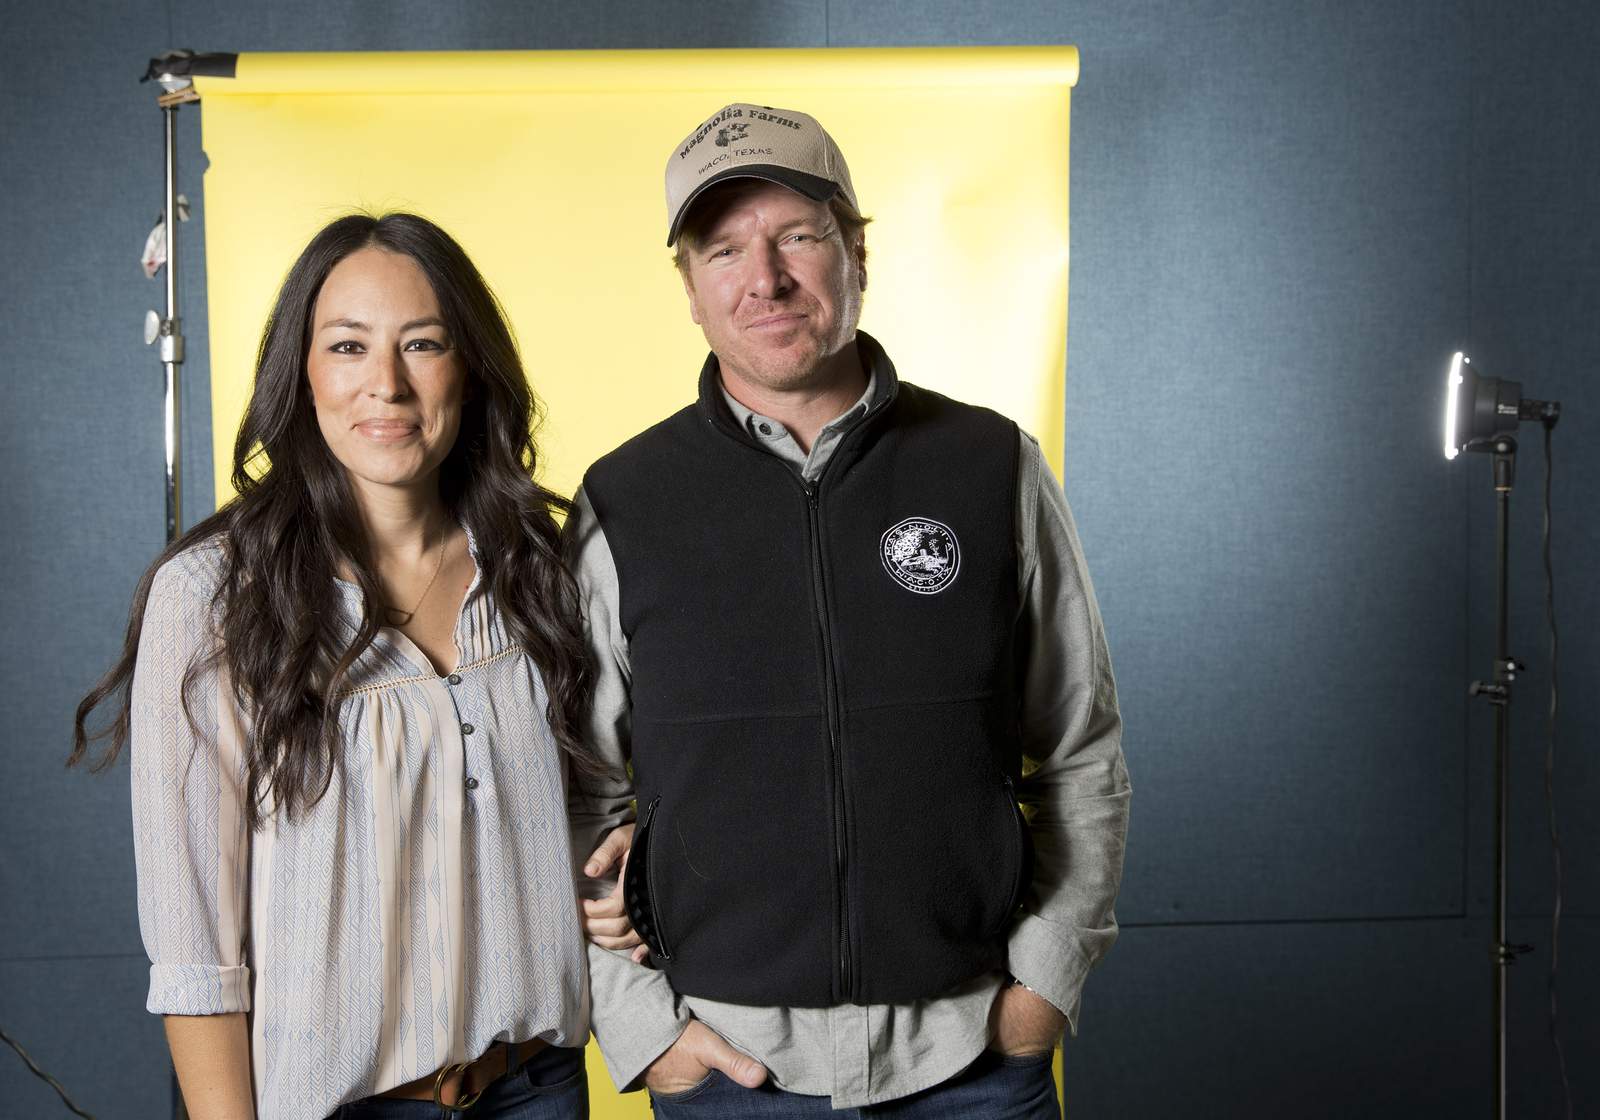 What Joanna, Chip Gaines had to say about filming the reboot of ‘Fixer Upper’ for their own network